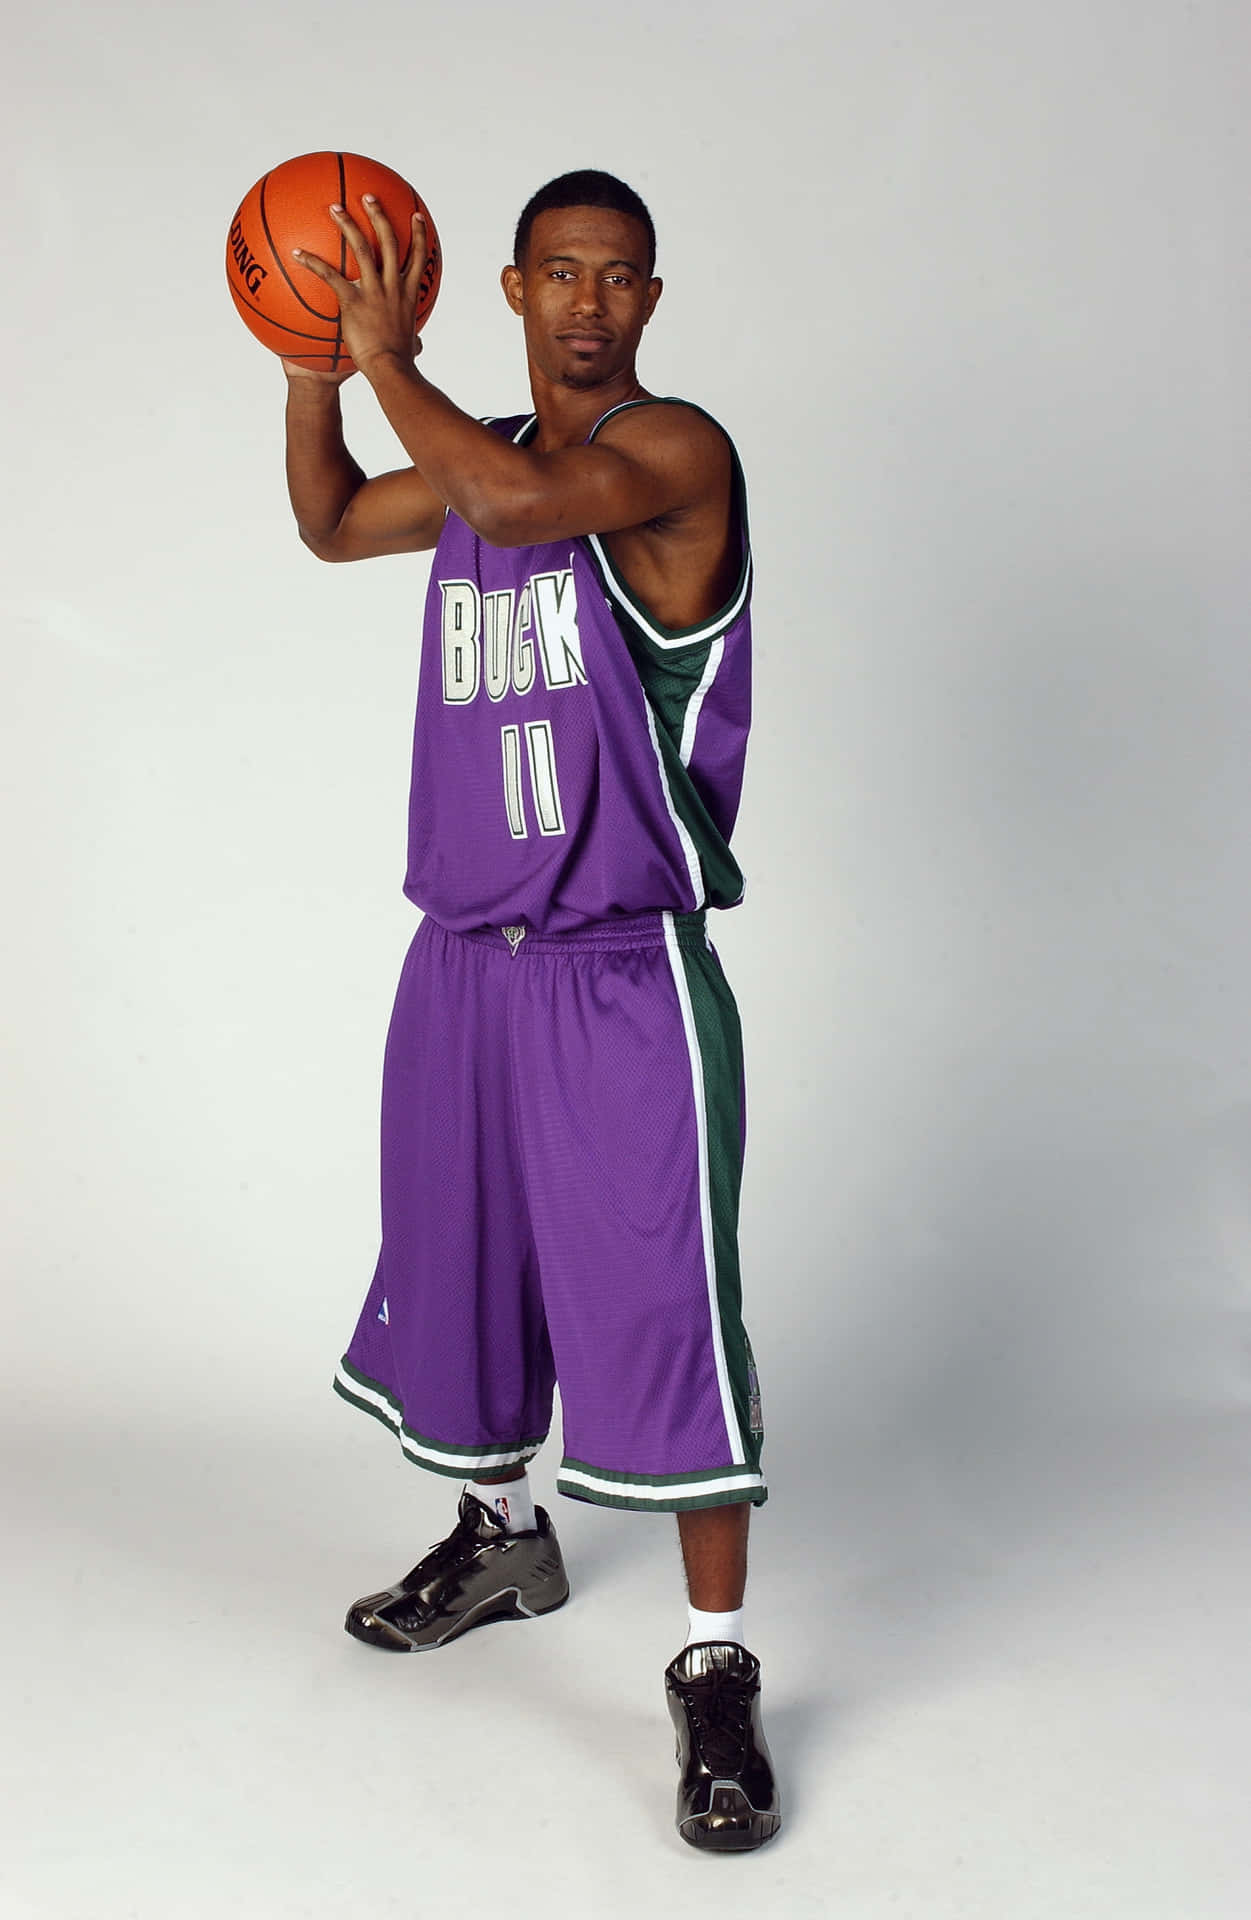 Funny Nba Player Photoshoot Picture